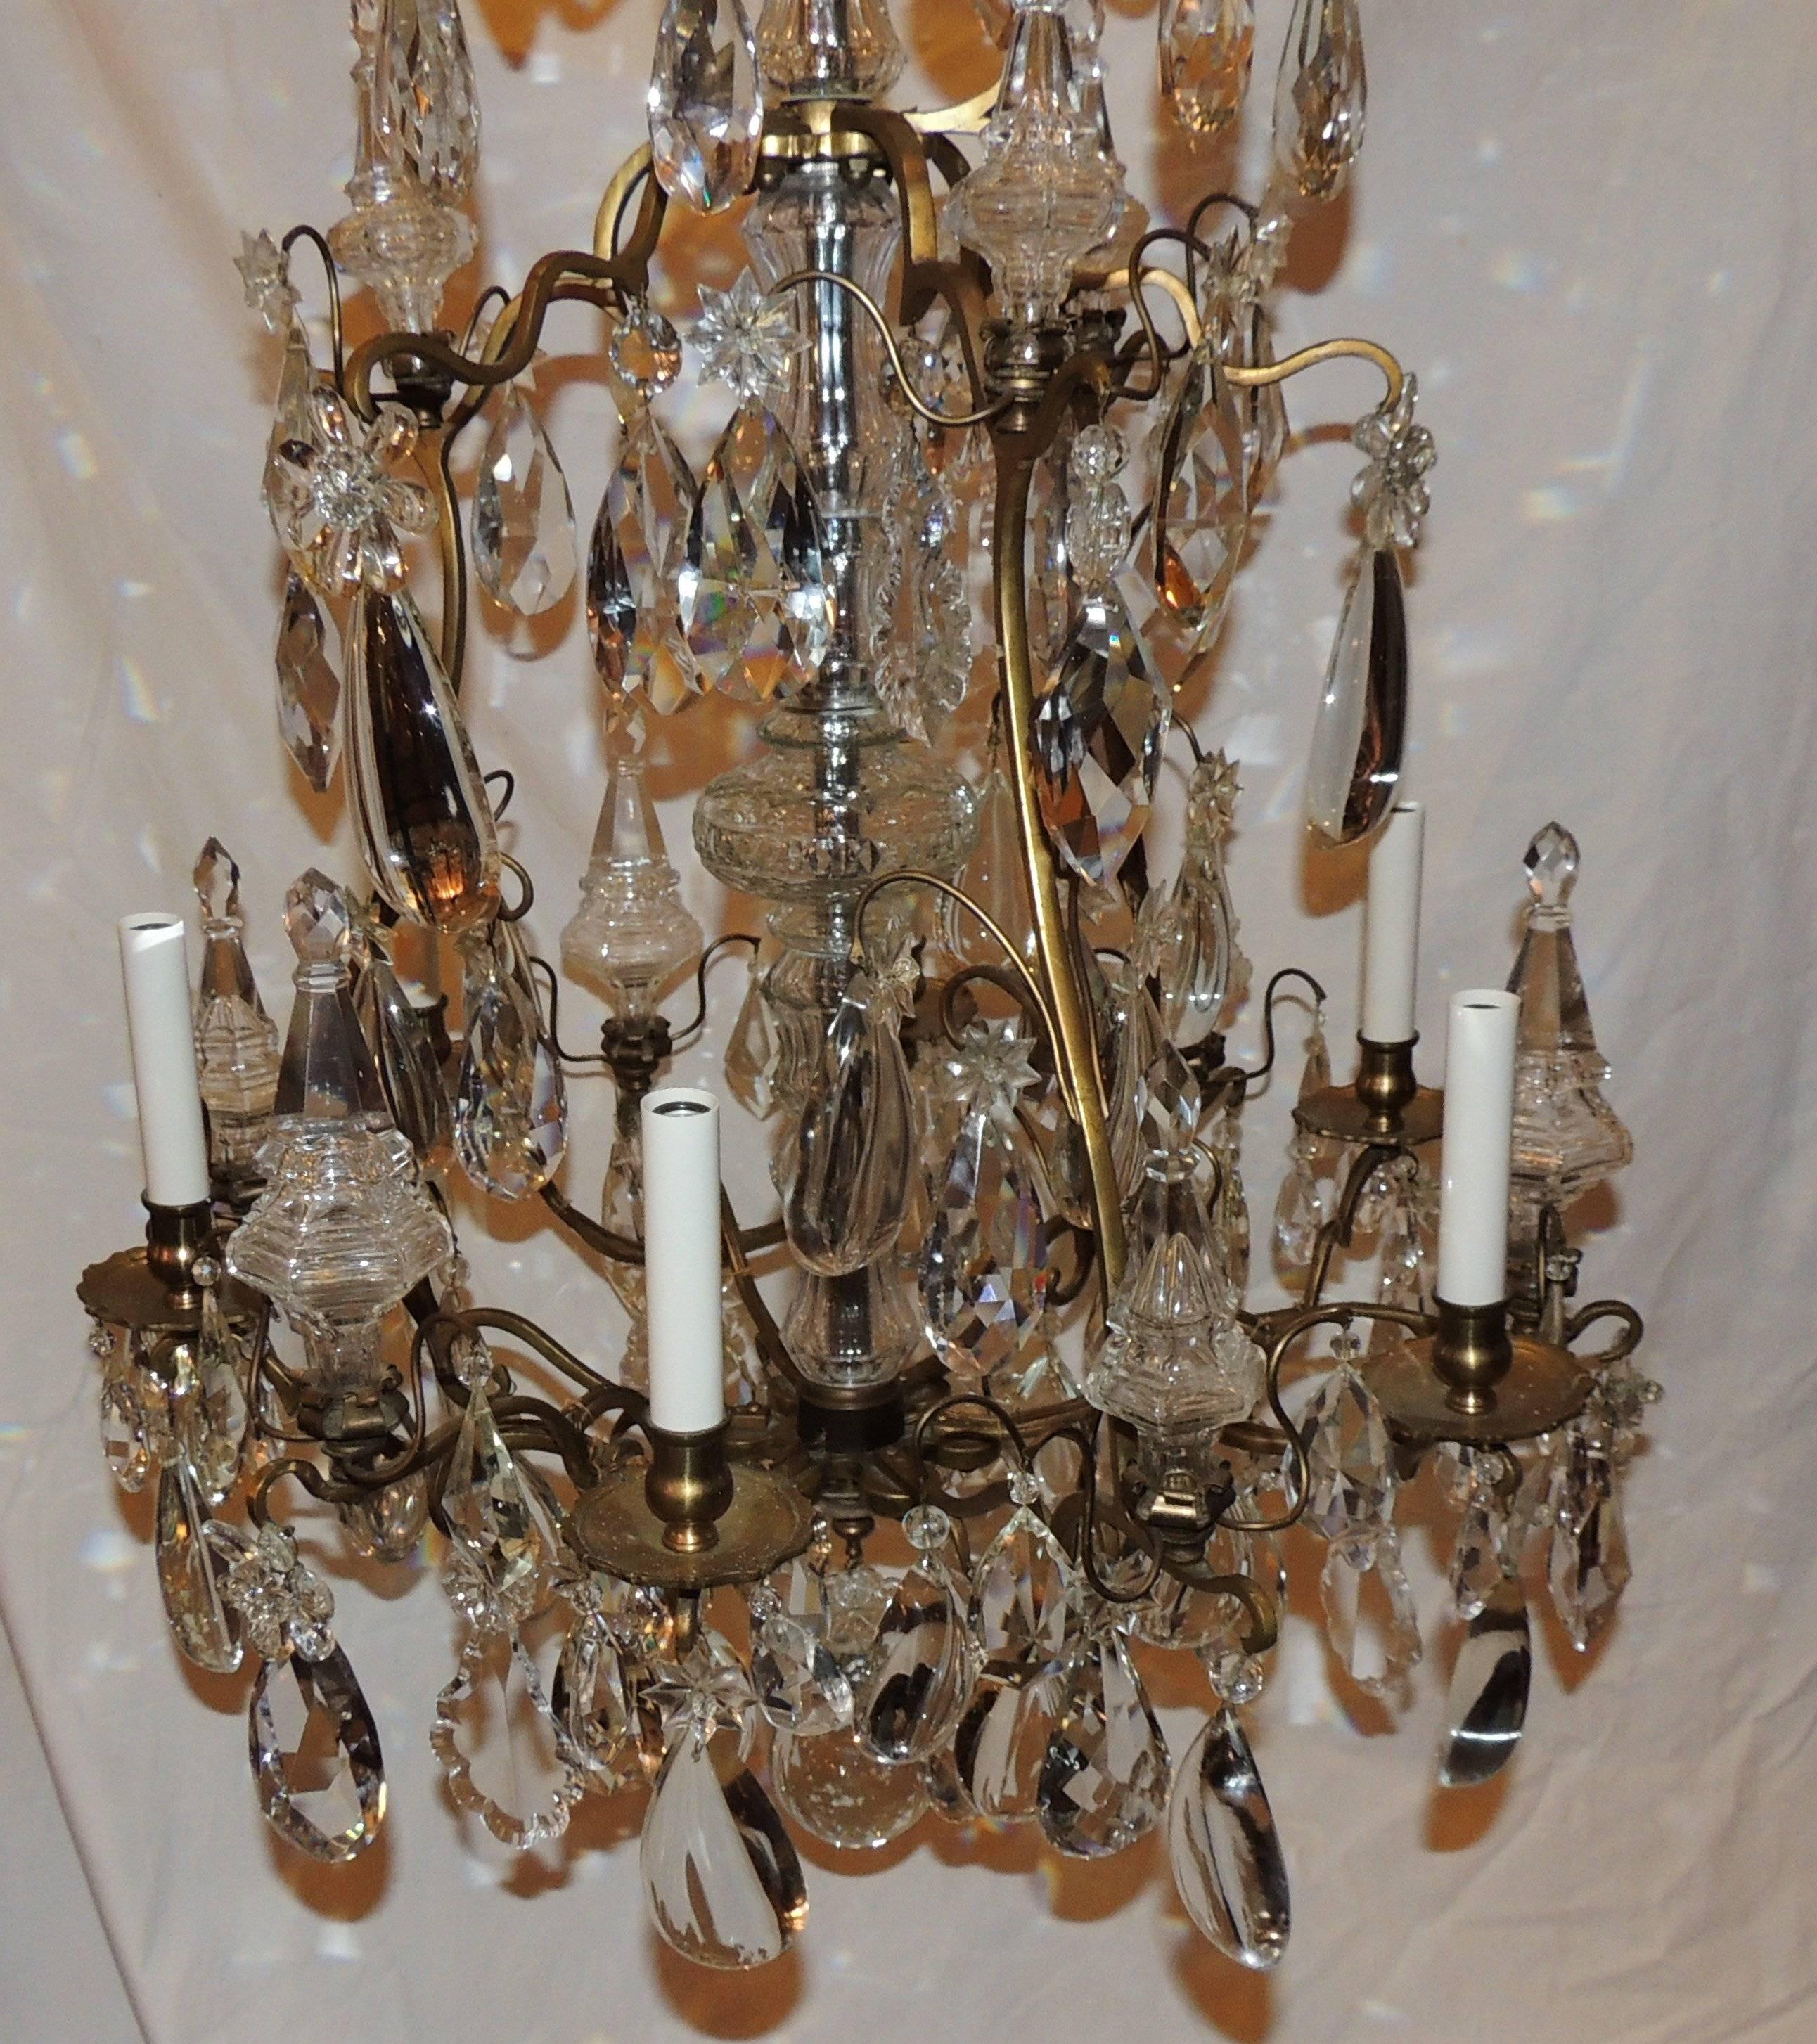 Mid-20th Century Fine French Dore Bronze Crystal Obilisk Six-Light Baccarat Chandelier Fixture For Sale